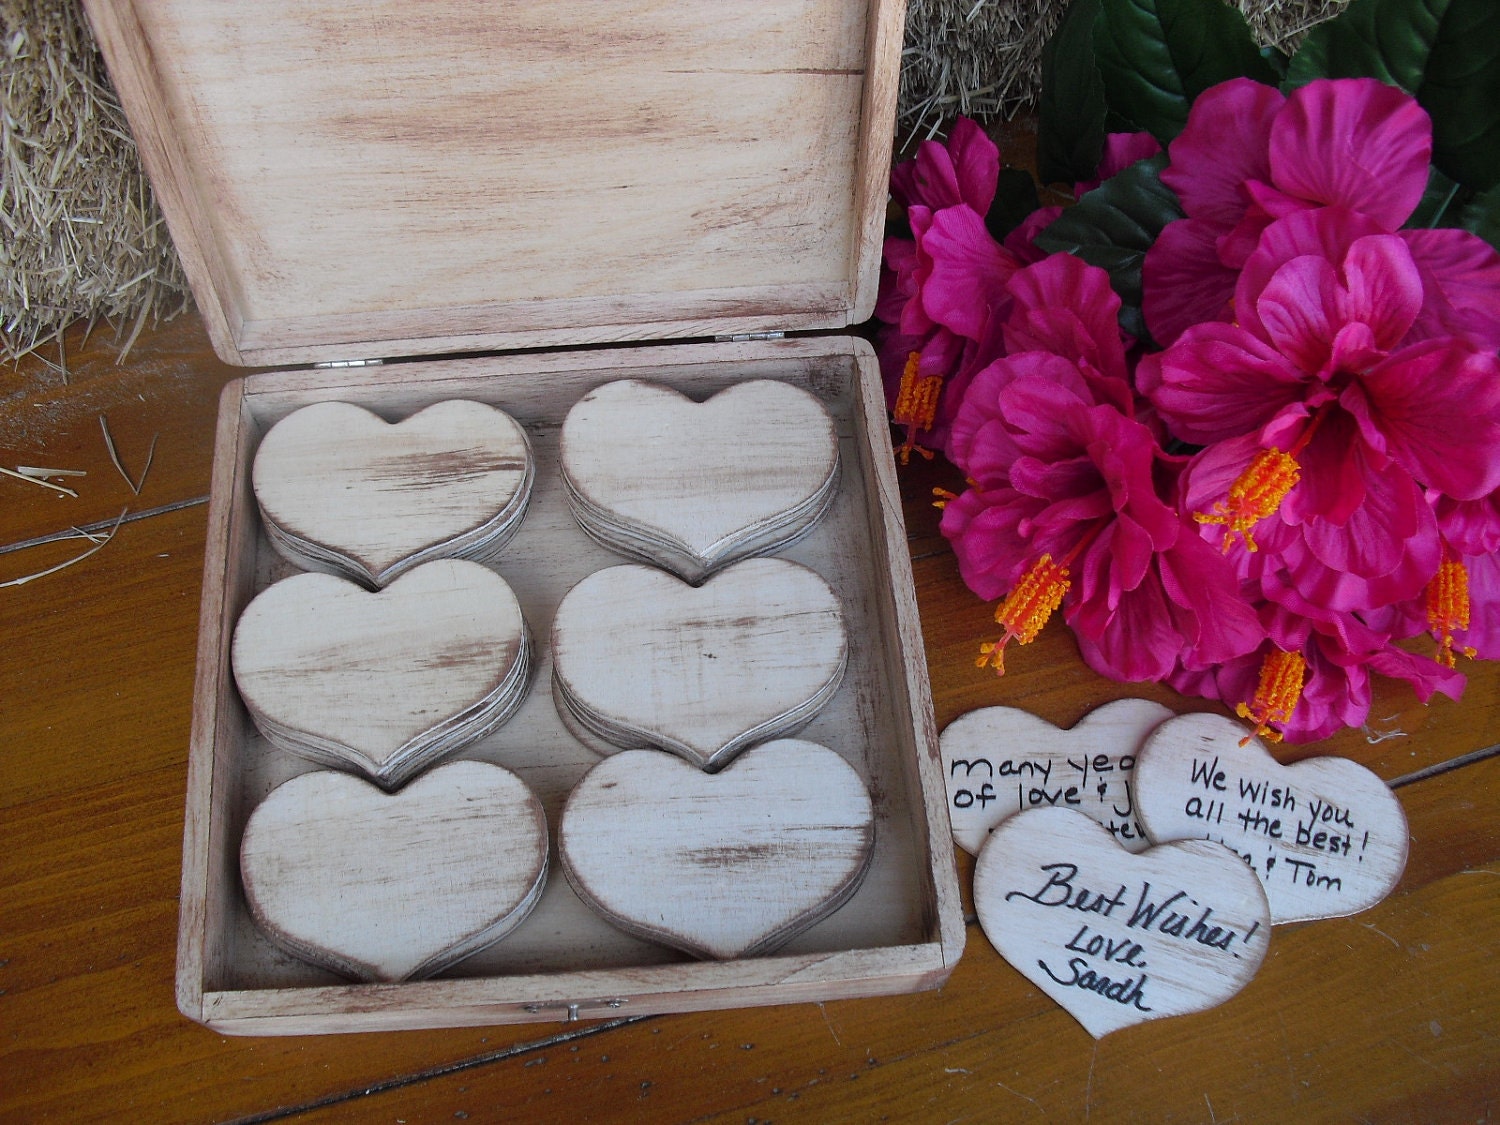 Engraved GUEST BOOK ALTERNATIVE Rustic Wedding Wood Personalized Set for 75 guests - Item 1293